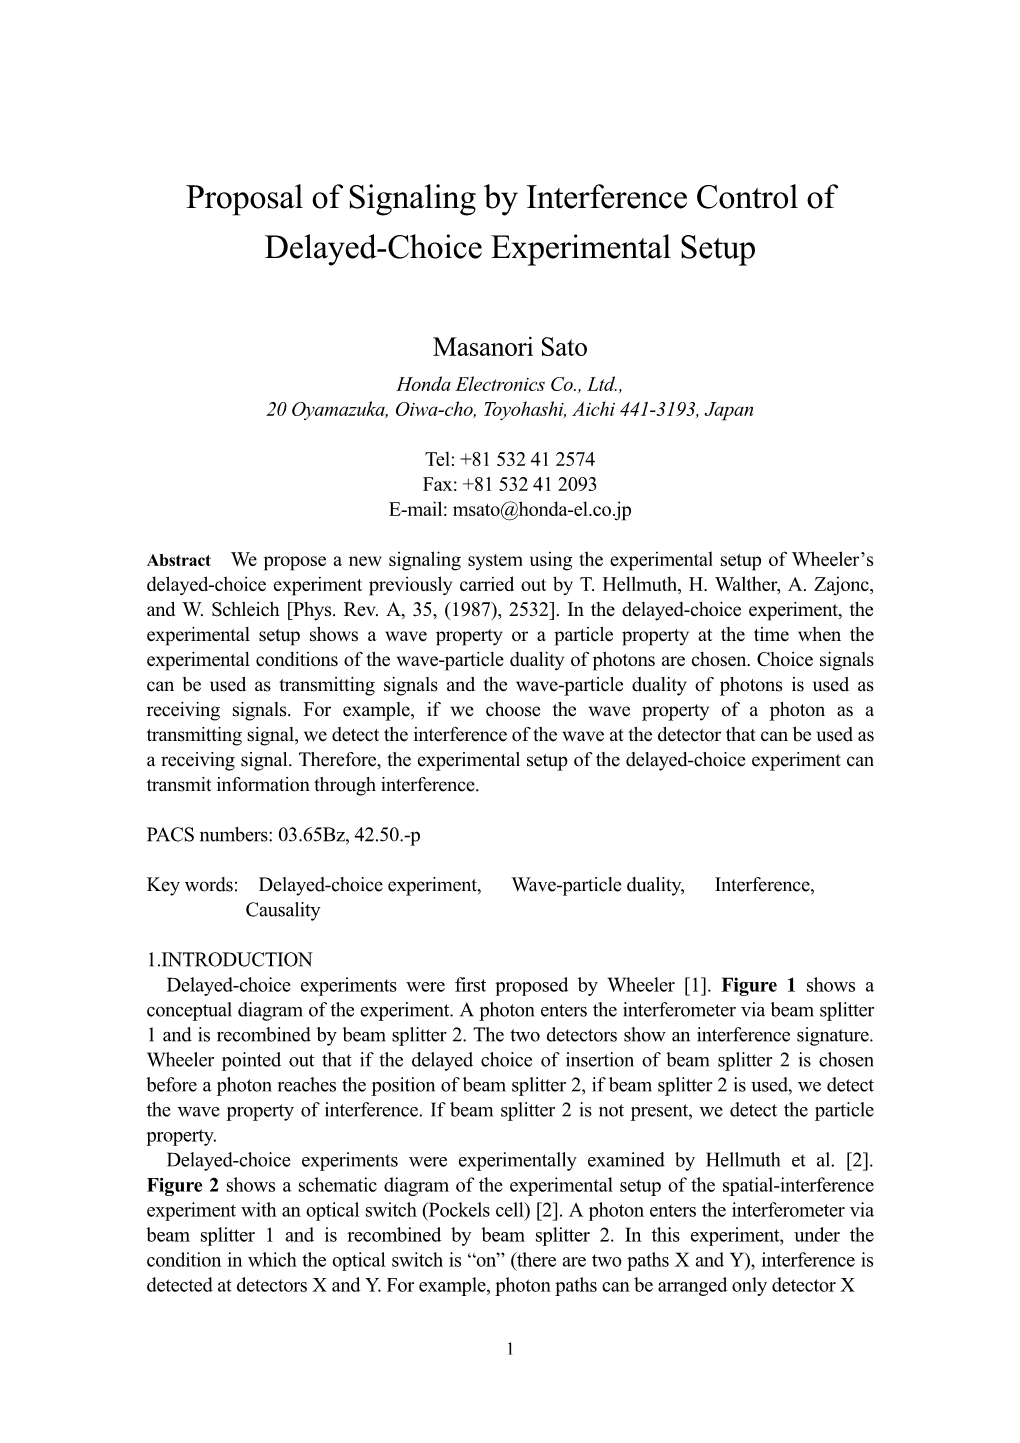 Proposal of Signaling by Interference Control of Delayed-Choice Experimental Setup